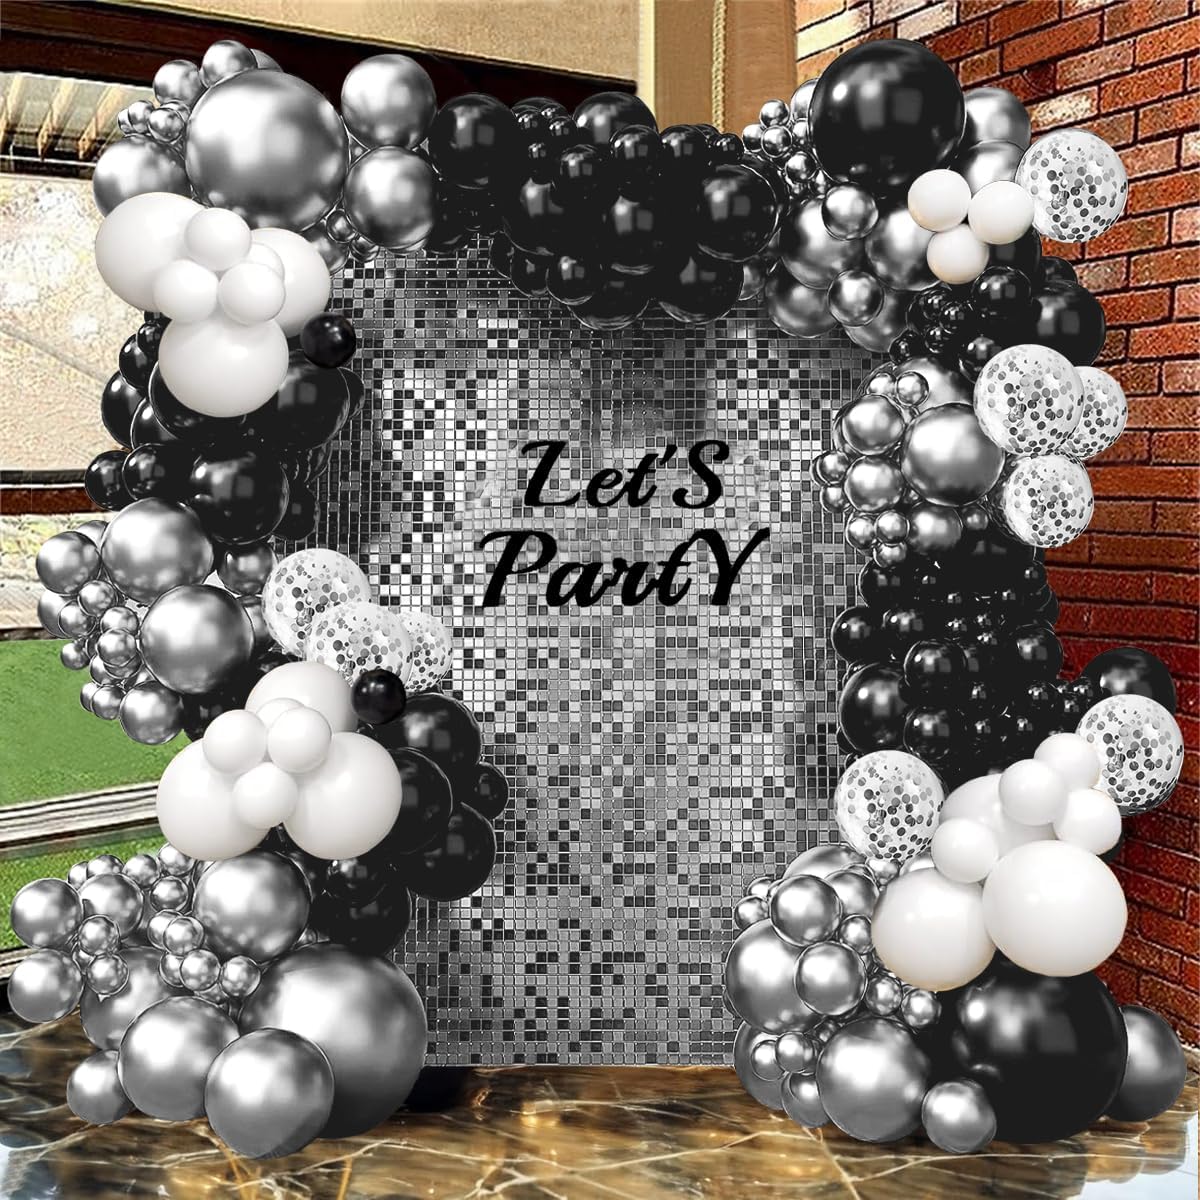 Black and Silver Balloons Garland Kit,119pcs Black White Metallic Silver and Silver Confetti Latex Balloons for Graduation Birthday Engagement Party Decorations